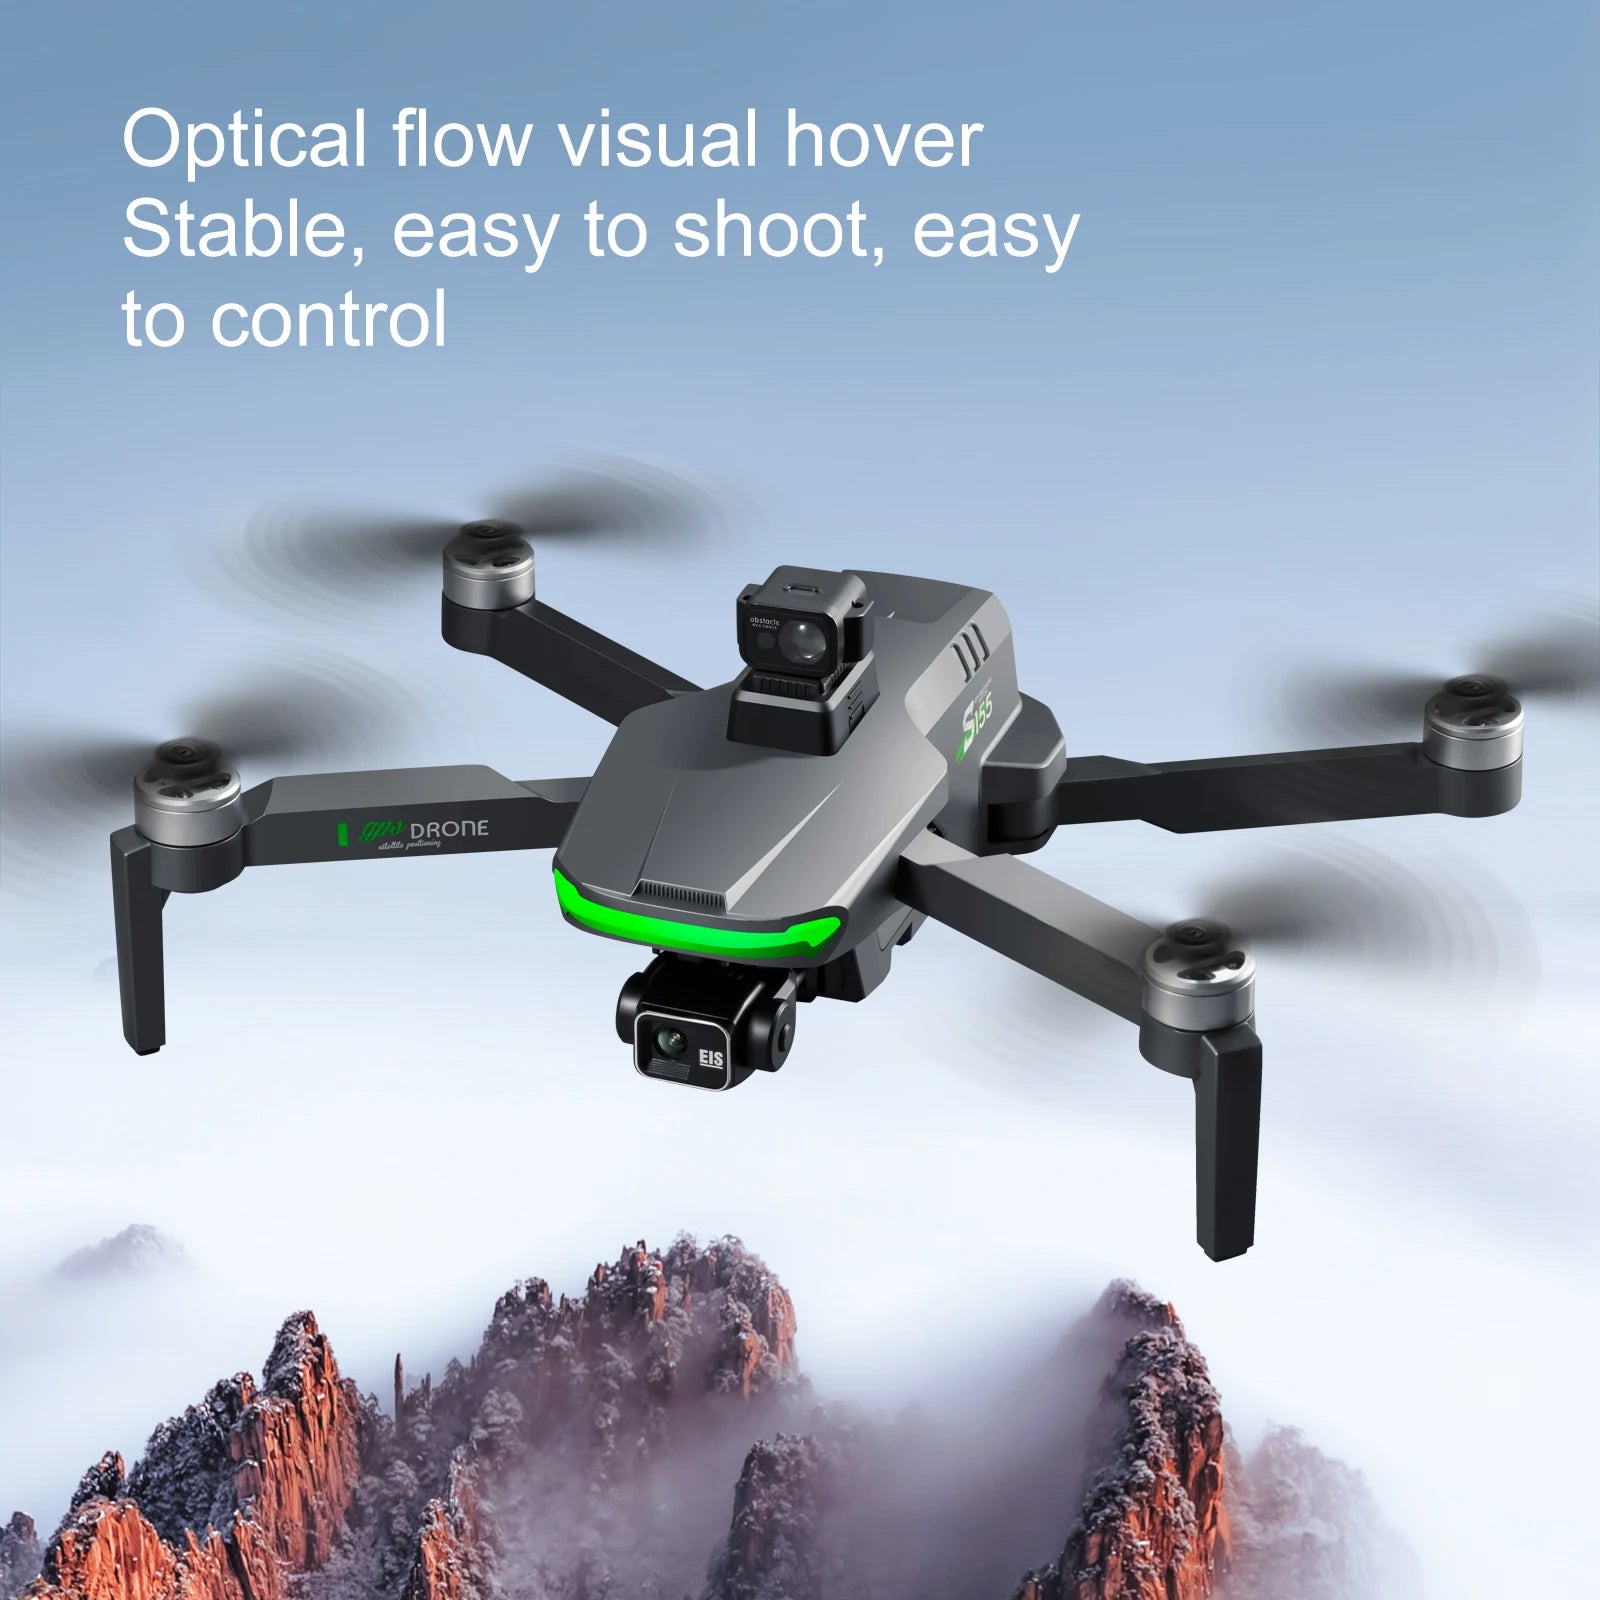 S155 Drone, Optical flow visual hover Stable, easy to shoot; easy to control W Gp